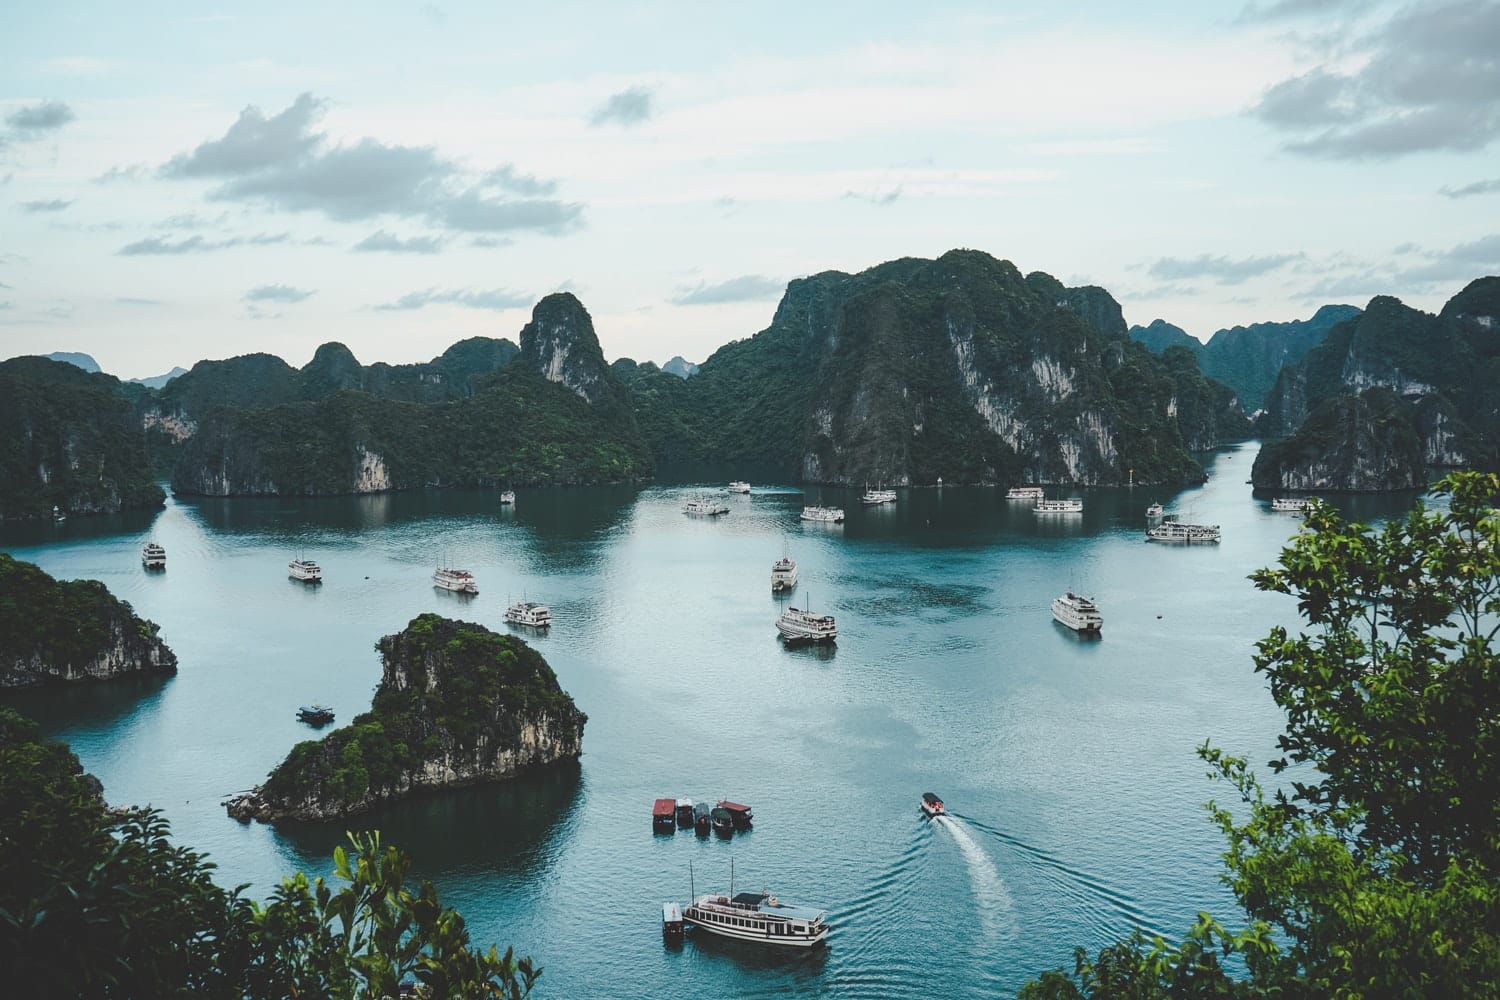 The Best Vietnam Tour Companies To Discover Vietnam With!